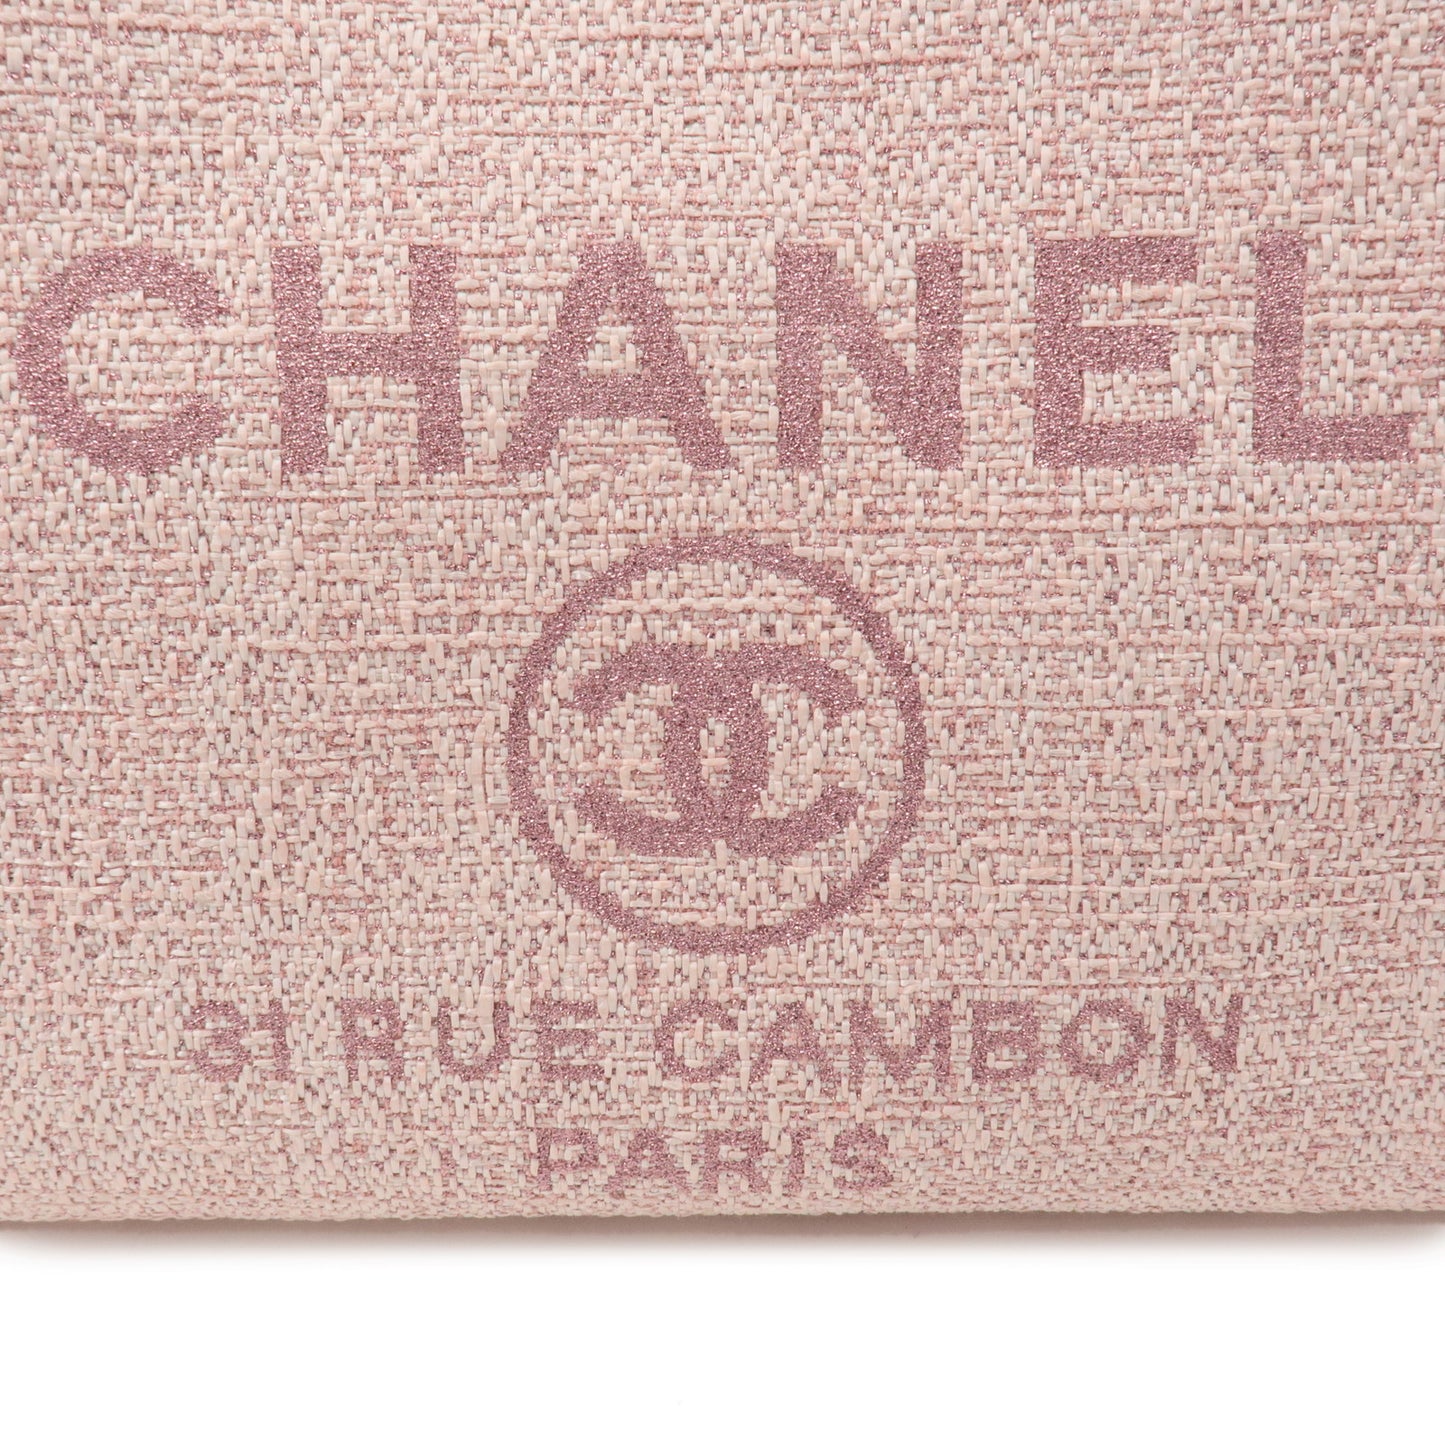 CHANEL Deauville MM Tweed Leather Chain Tote Bag Pink A67001